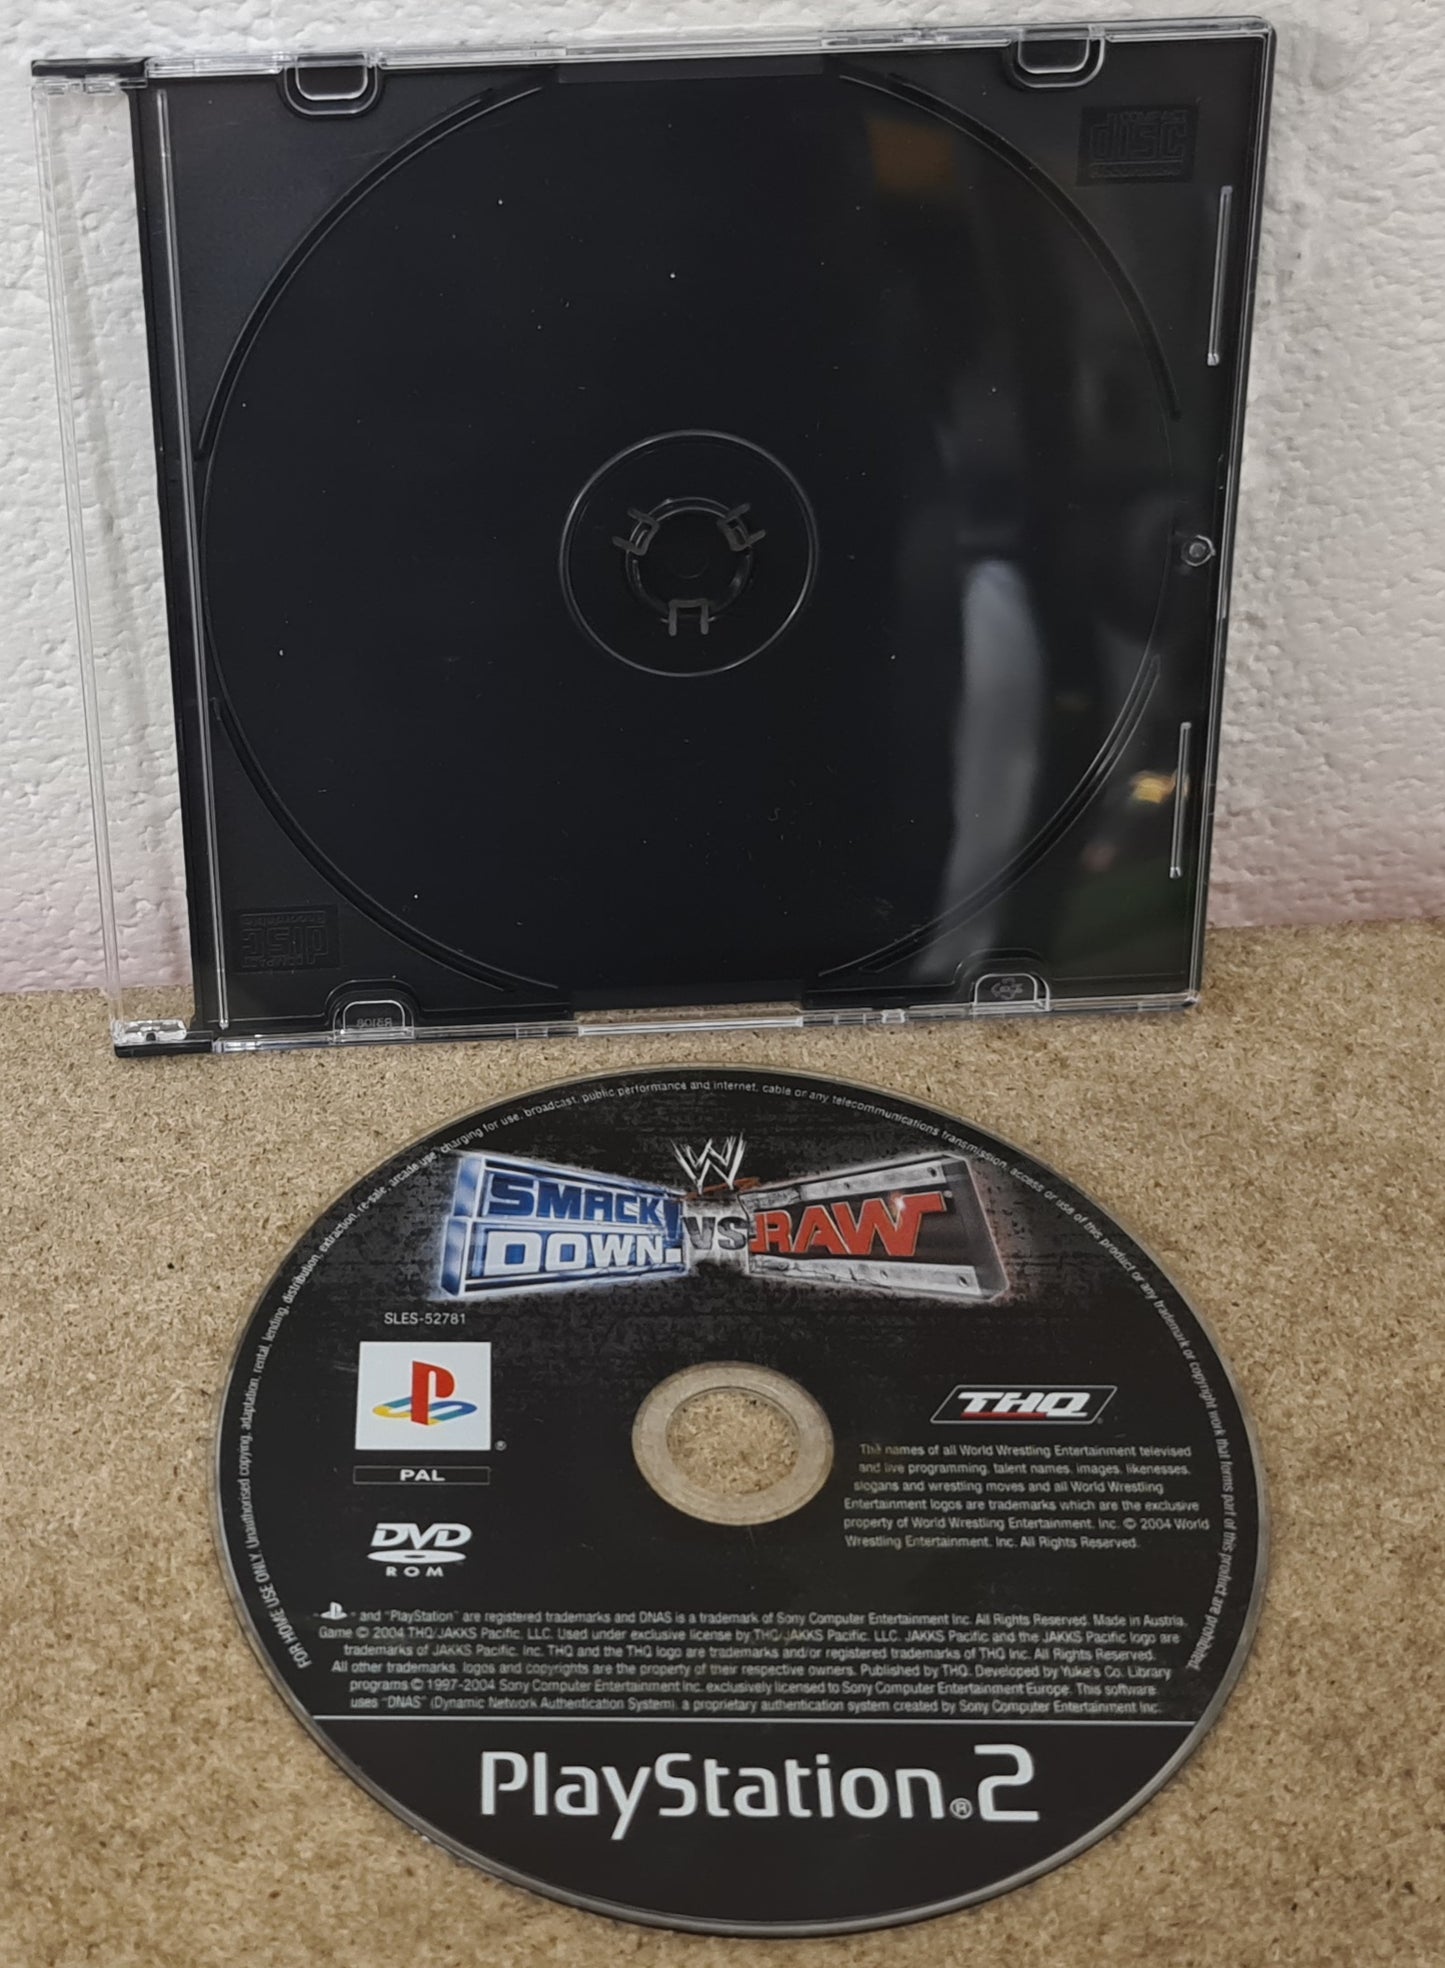 WWE Smackdown Vs Raw Sony Playstation 2 (PS2) Game Disc Only